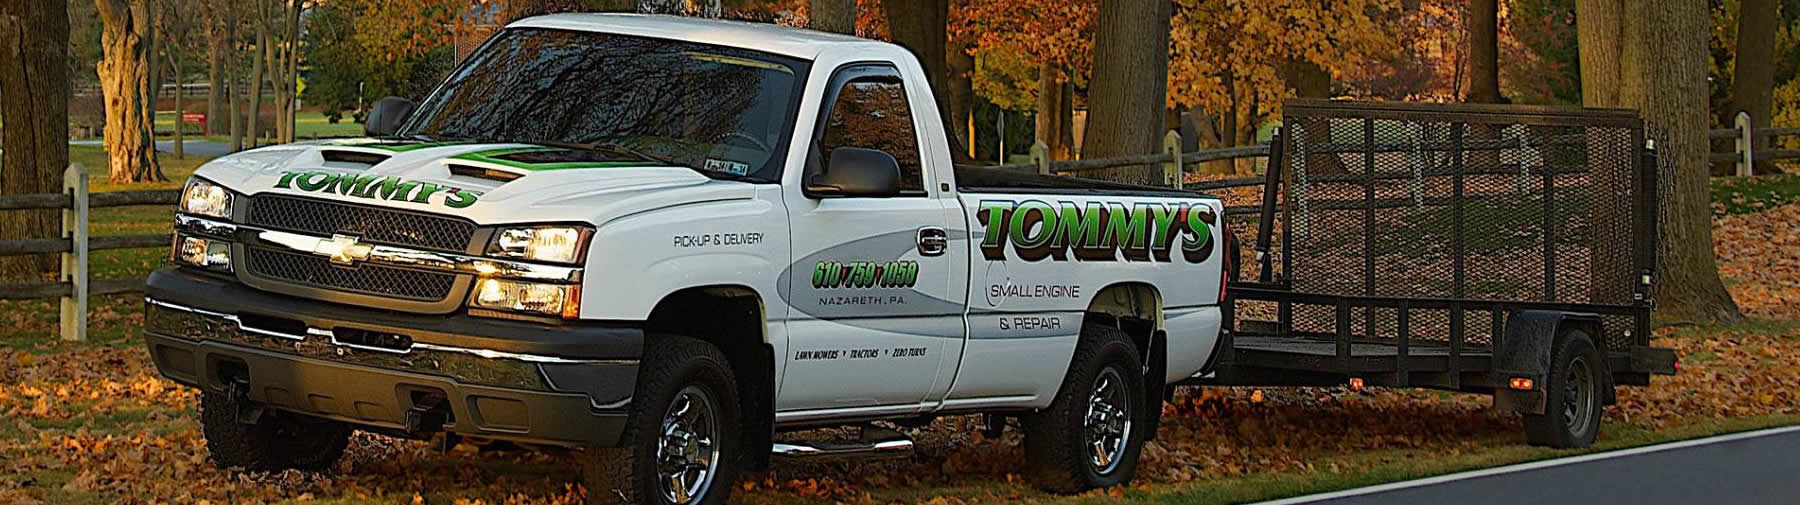 tommy's small engine company truck